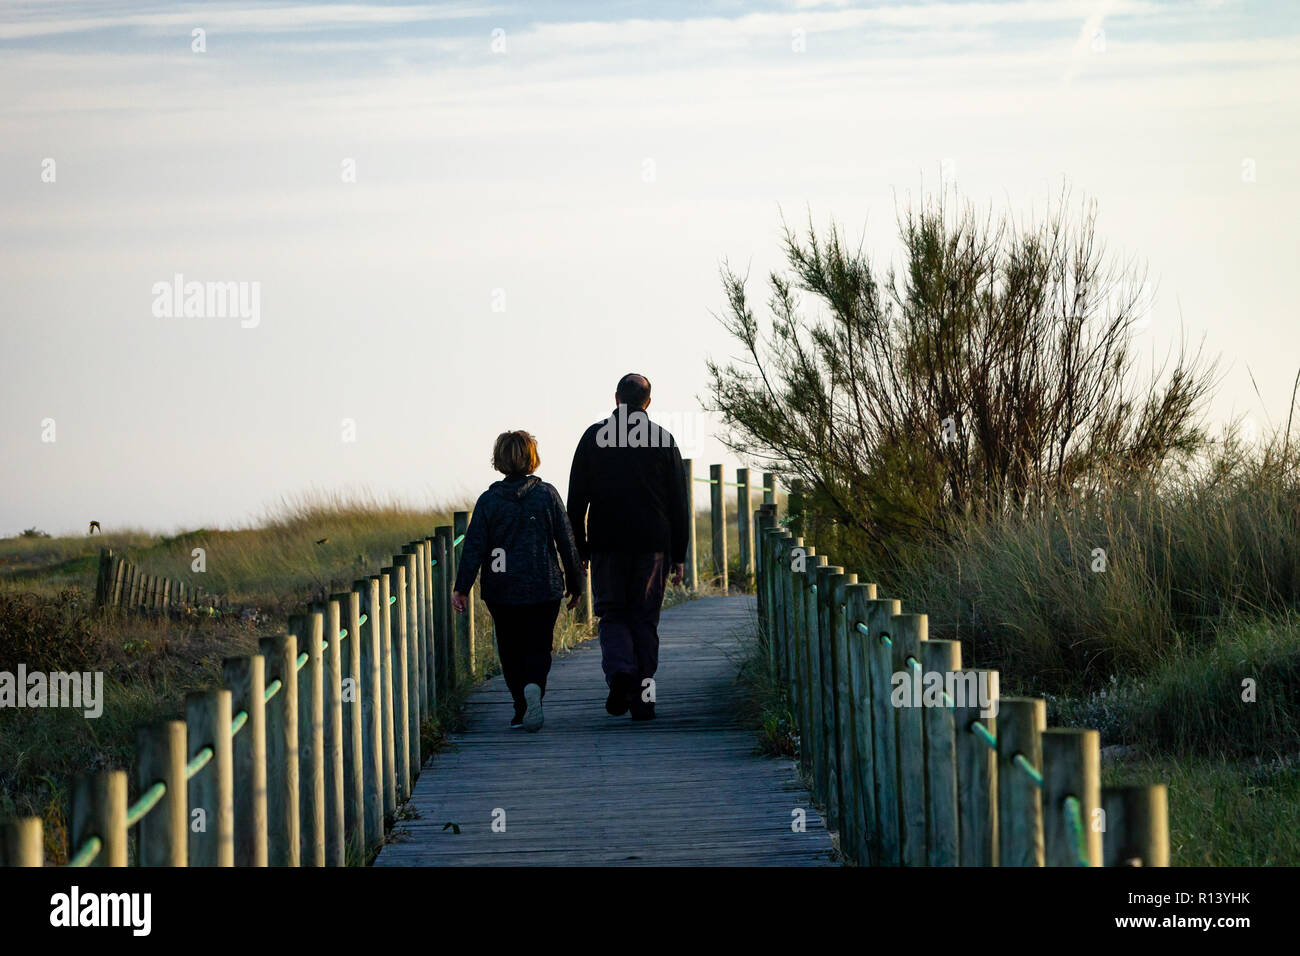 Middle-Aged couple walks on boardwalk amidst vegetation. Back View. Stock Photo